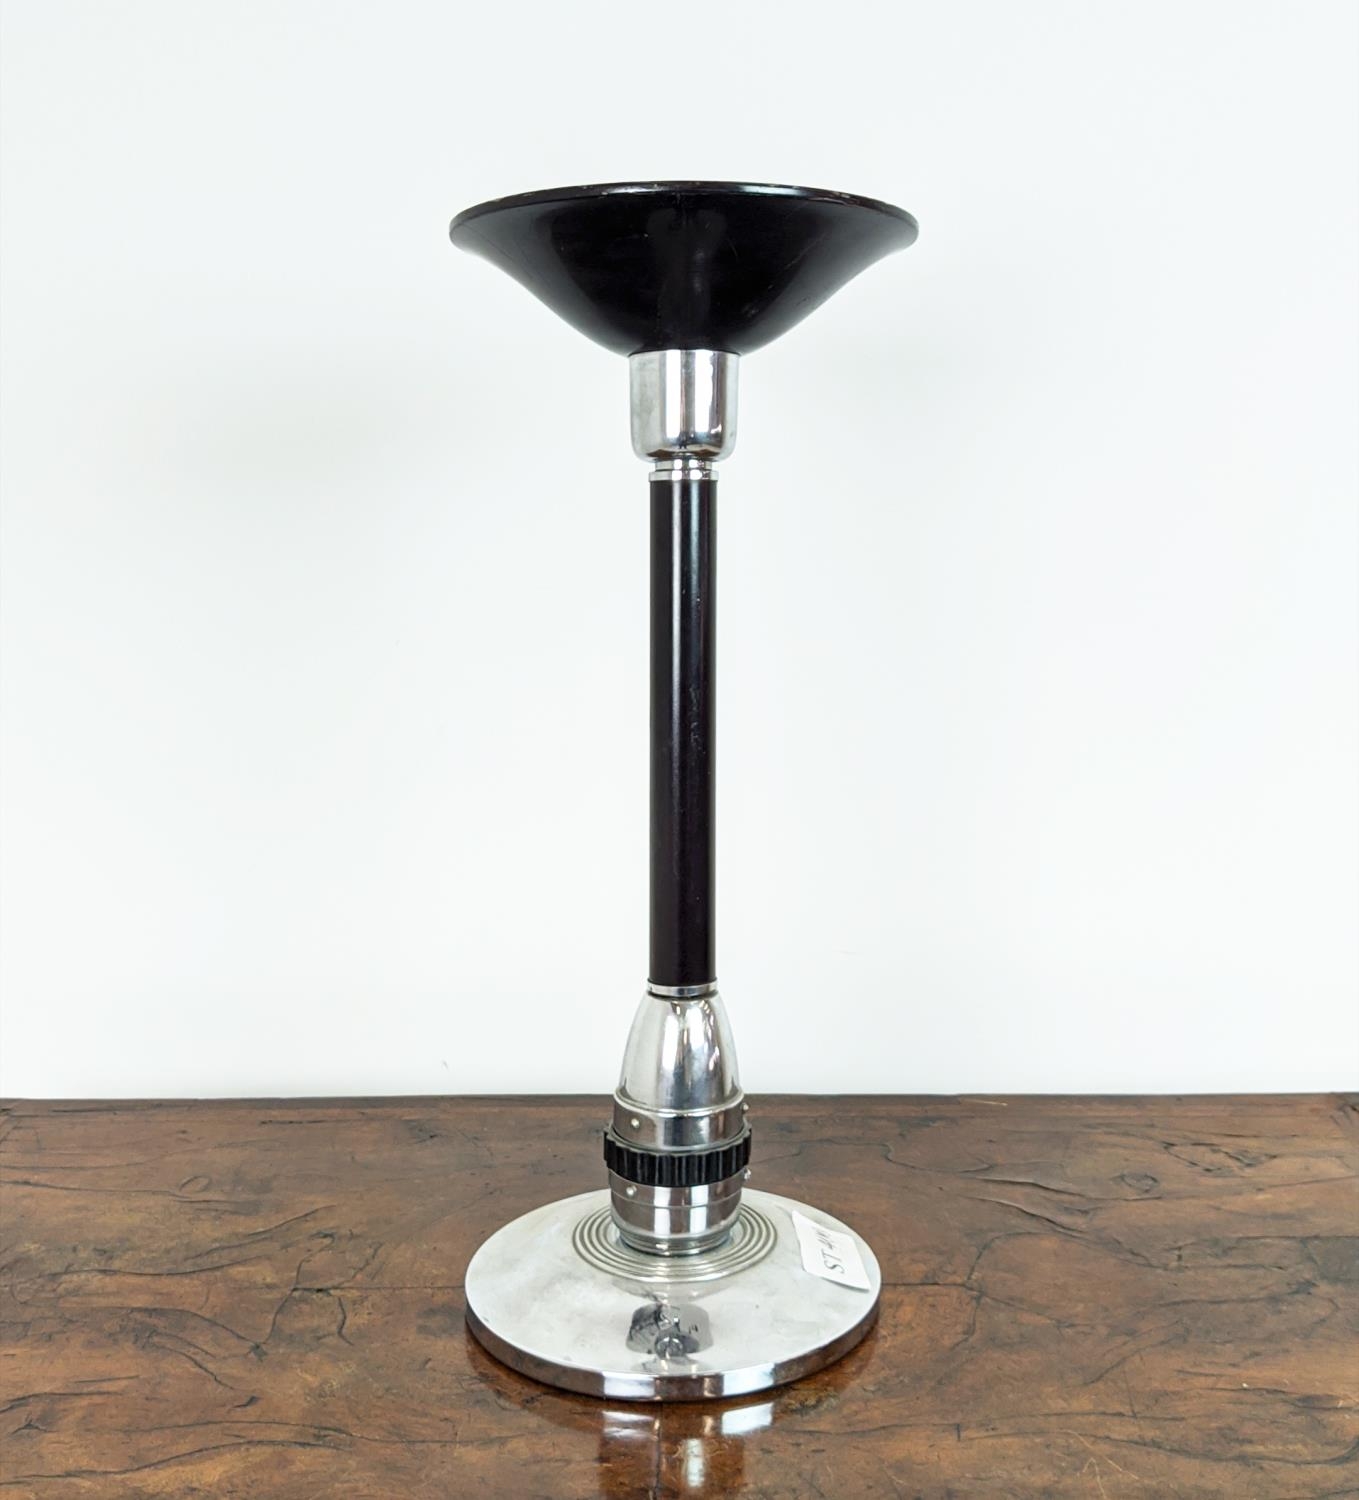 TABLE UPLIGHTER, Art Deco polished metal with a black pole, 59cm H x 25cm.